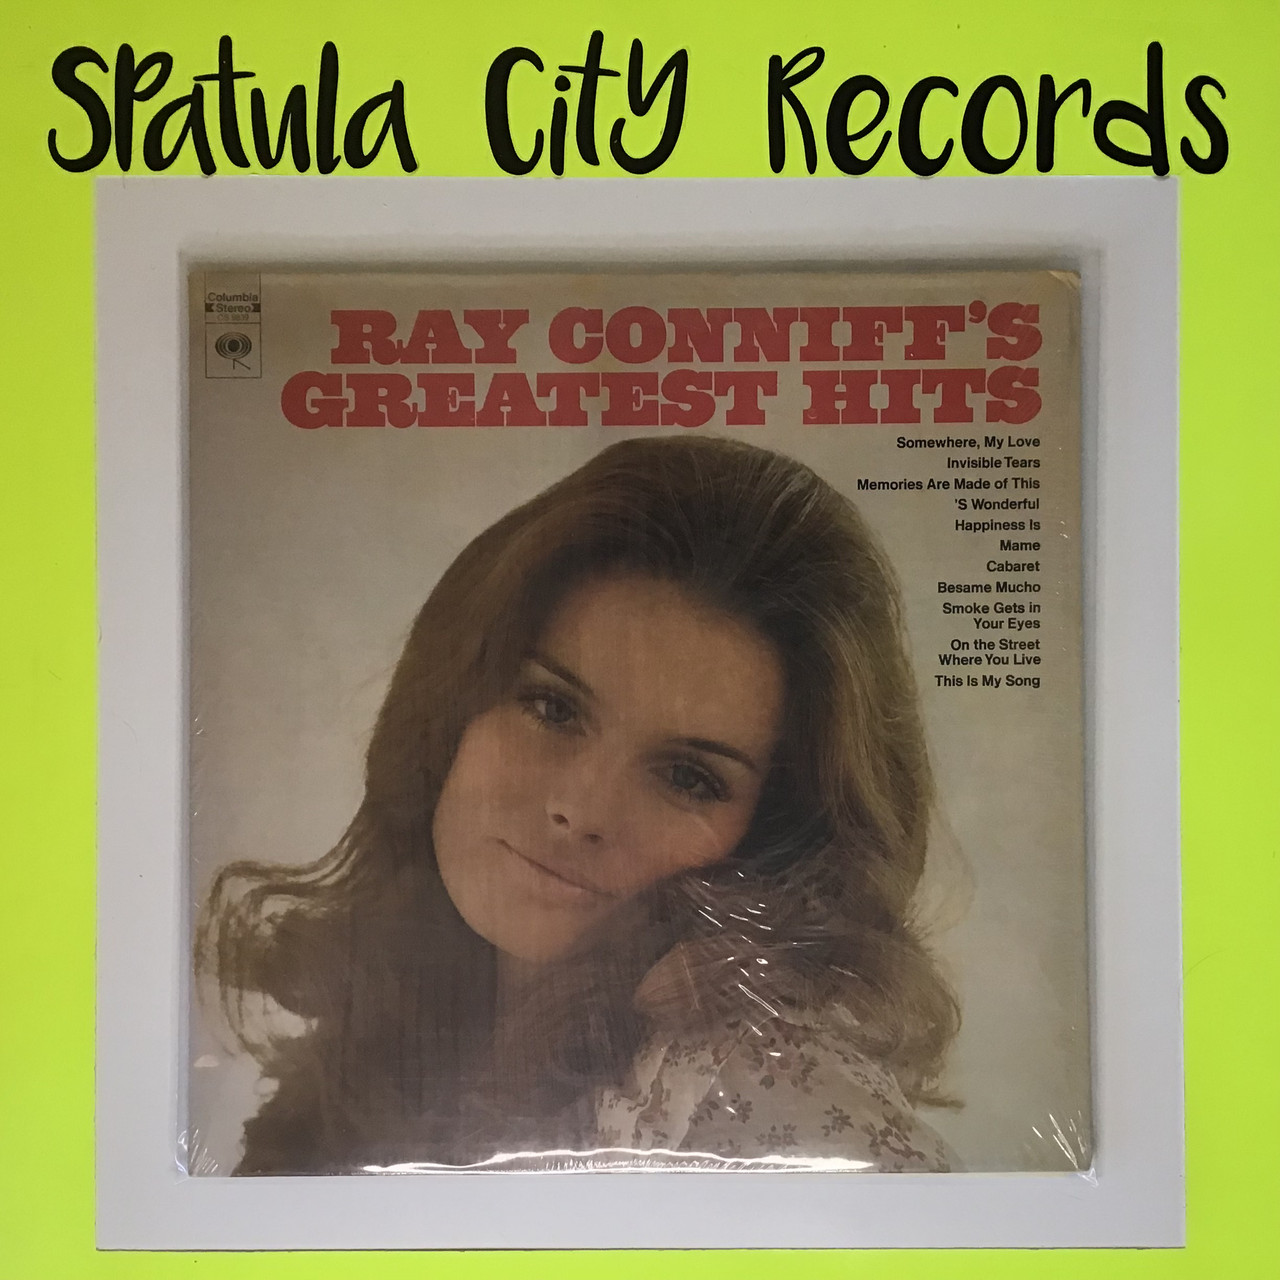 Ray Conniff - Ray Conniff's Greatest Hits  - vinyl record album LP